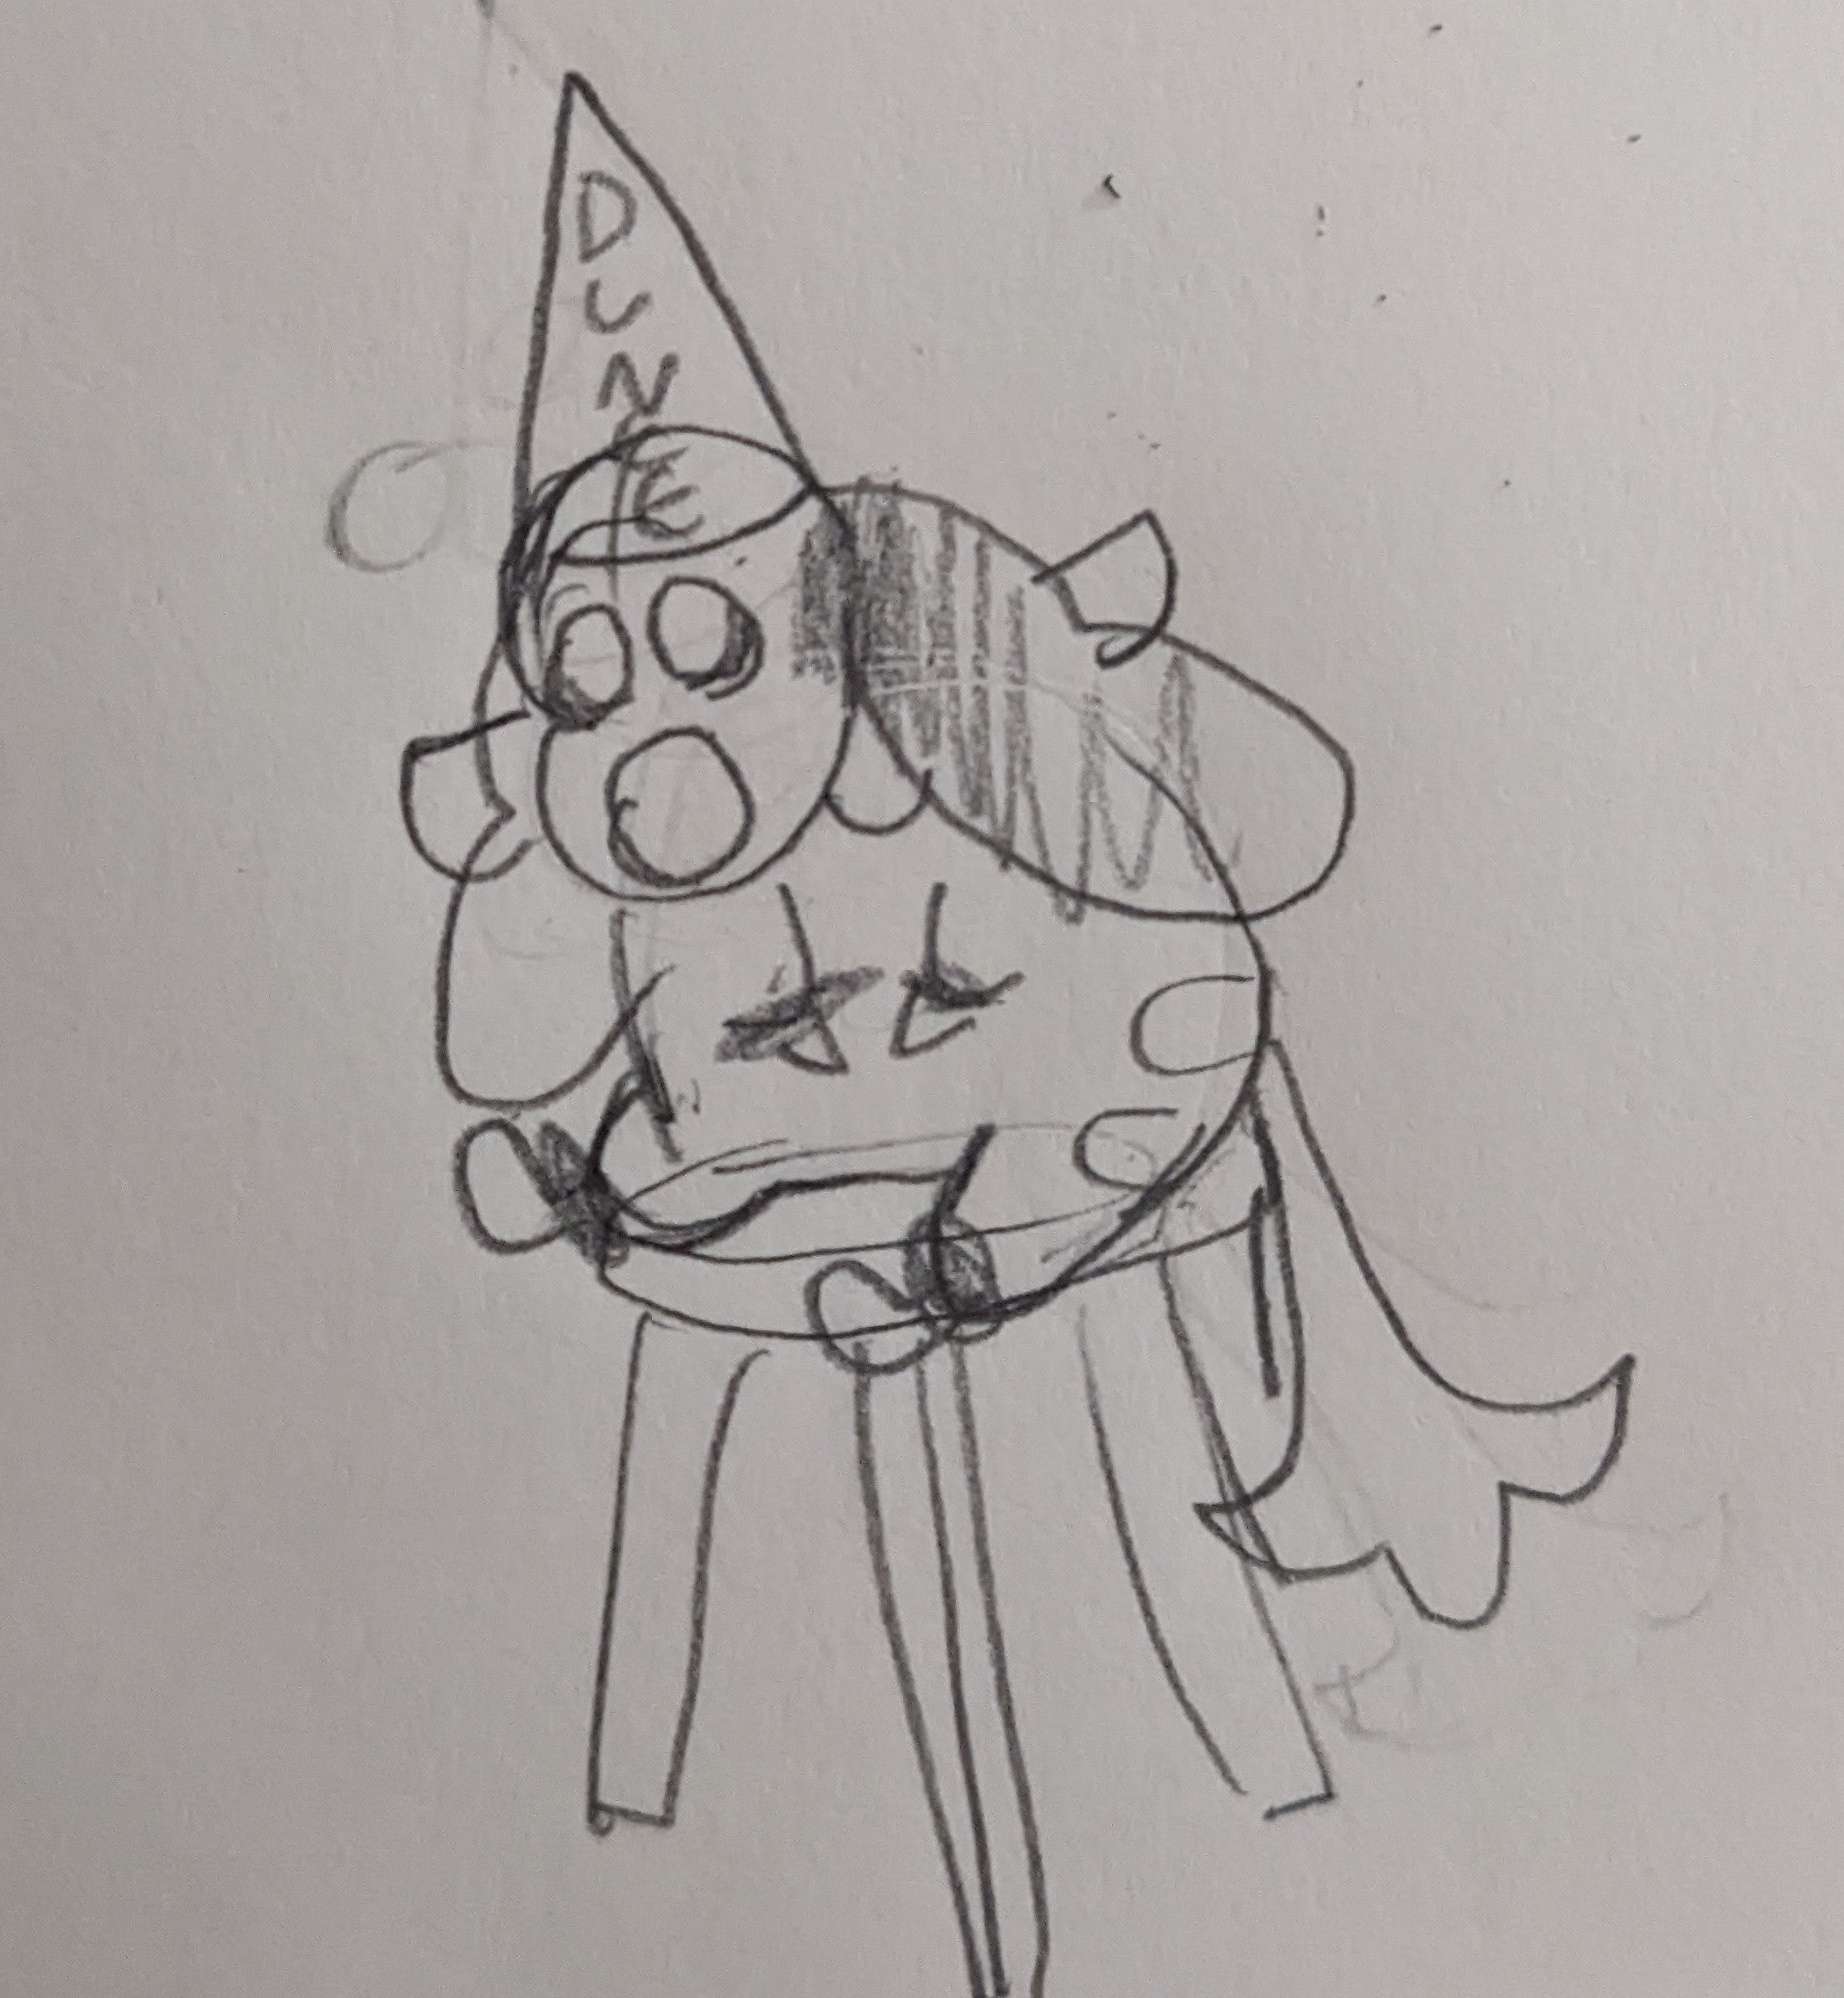 scribble of my fursona, sitting on a stool with a dunce cap on